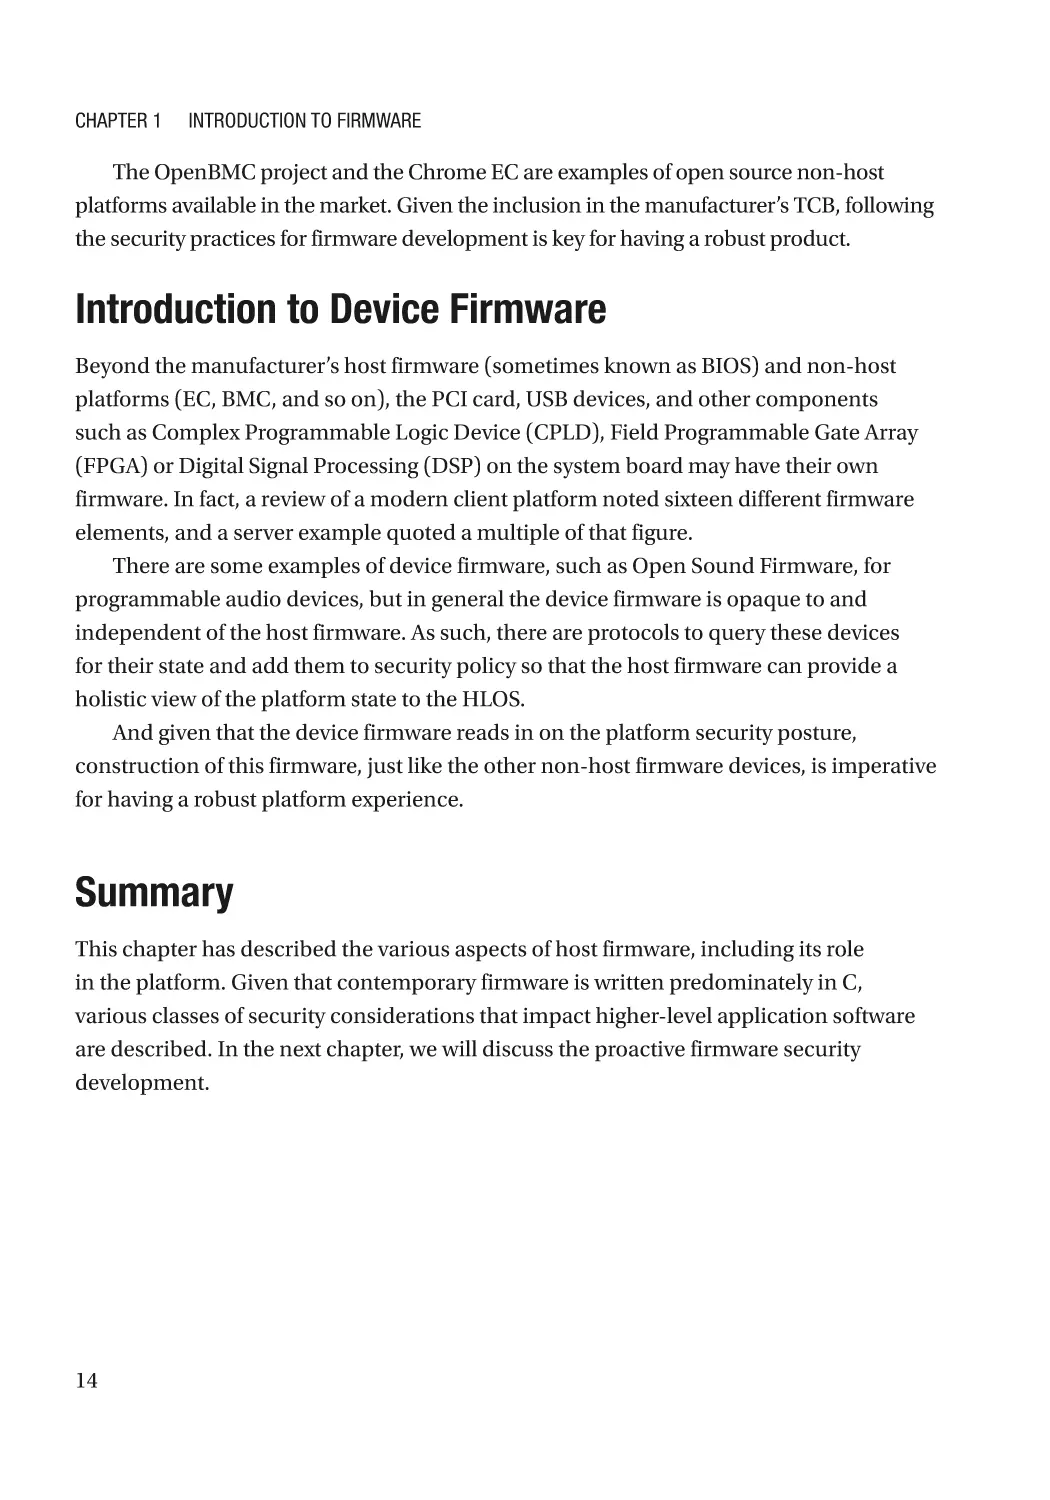 Introduction to Device Firmware
Summary